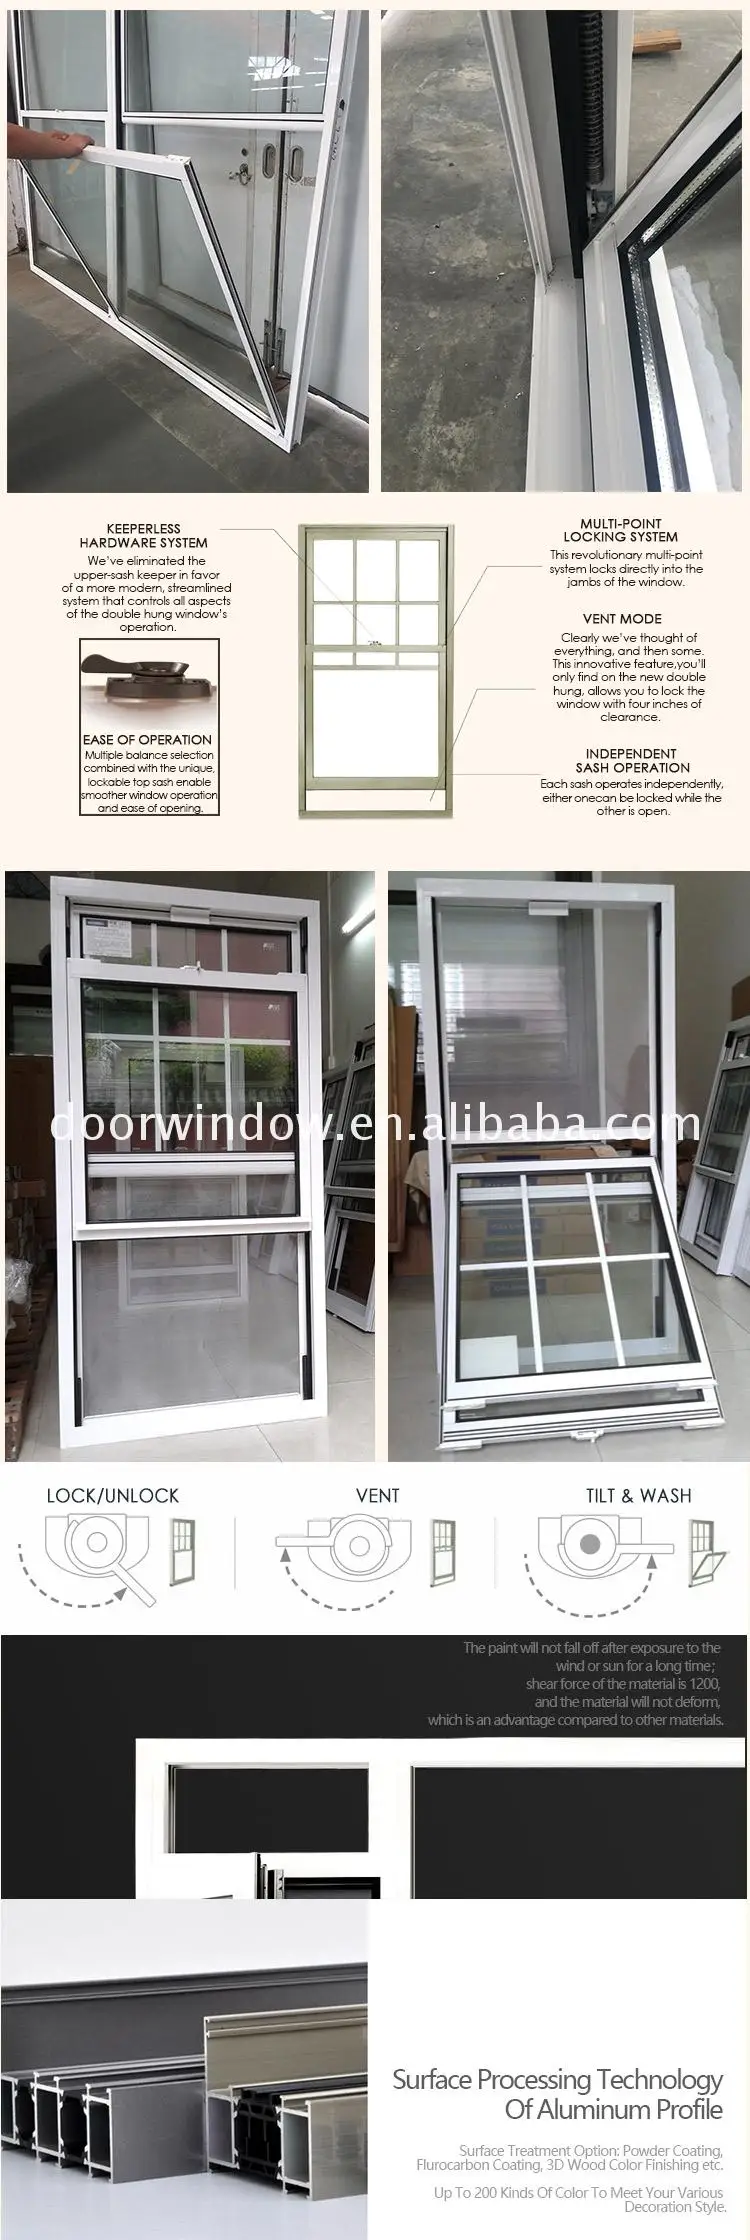 Factory direct selling double single hung window pane windows with grilles